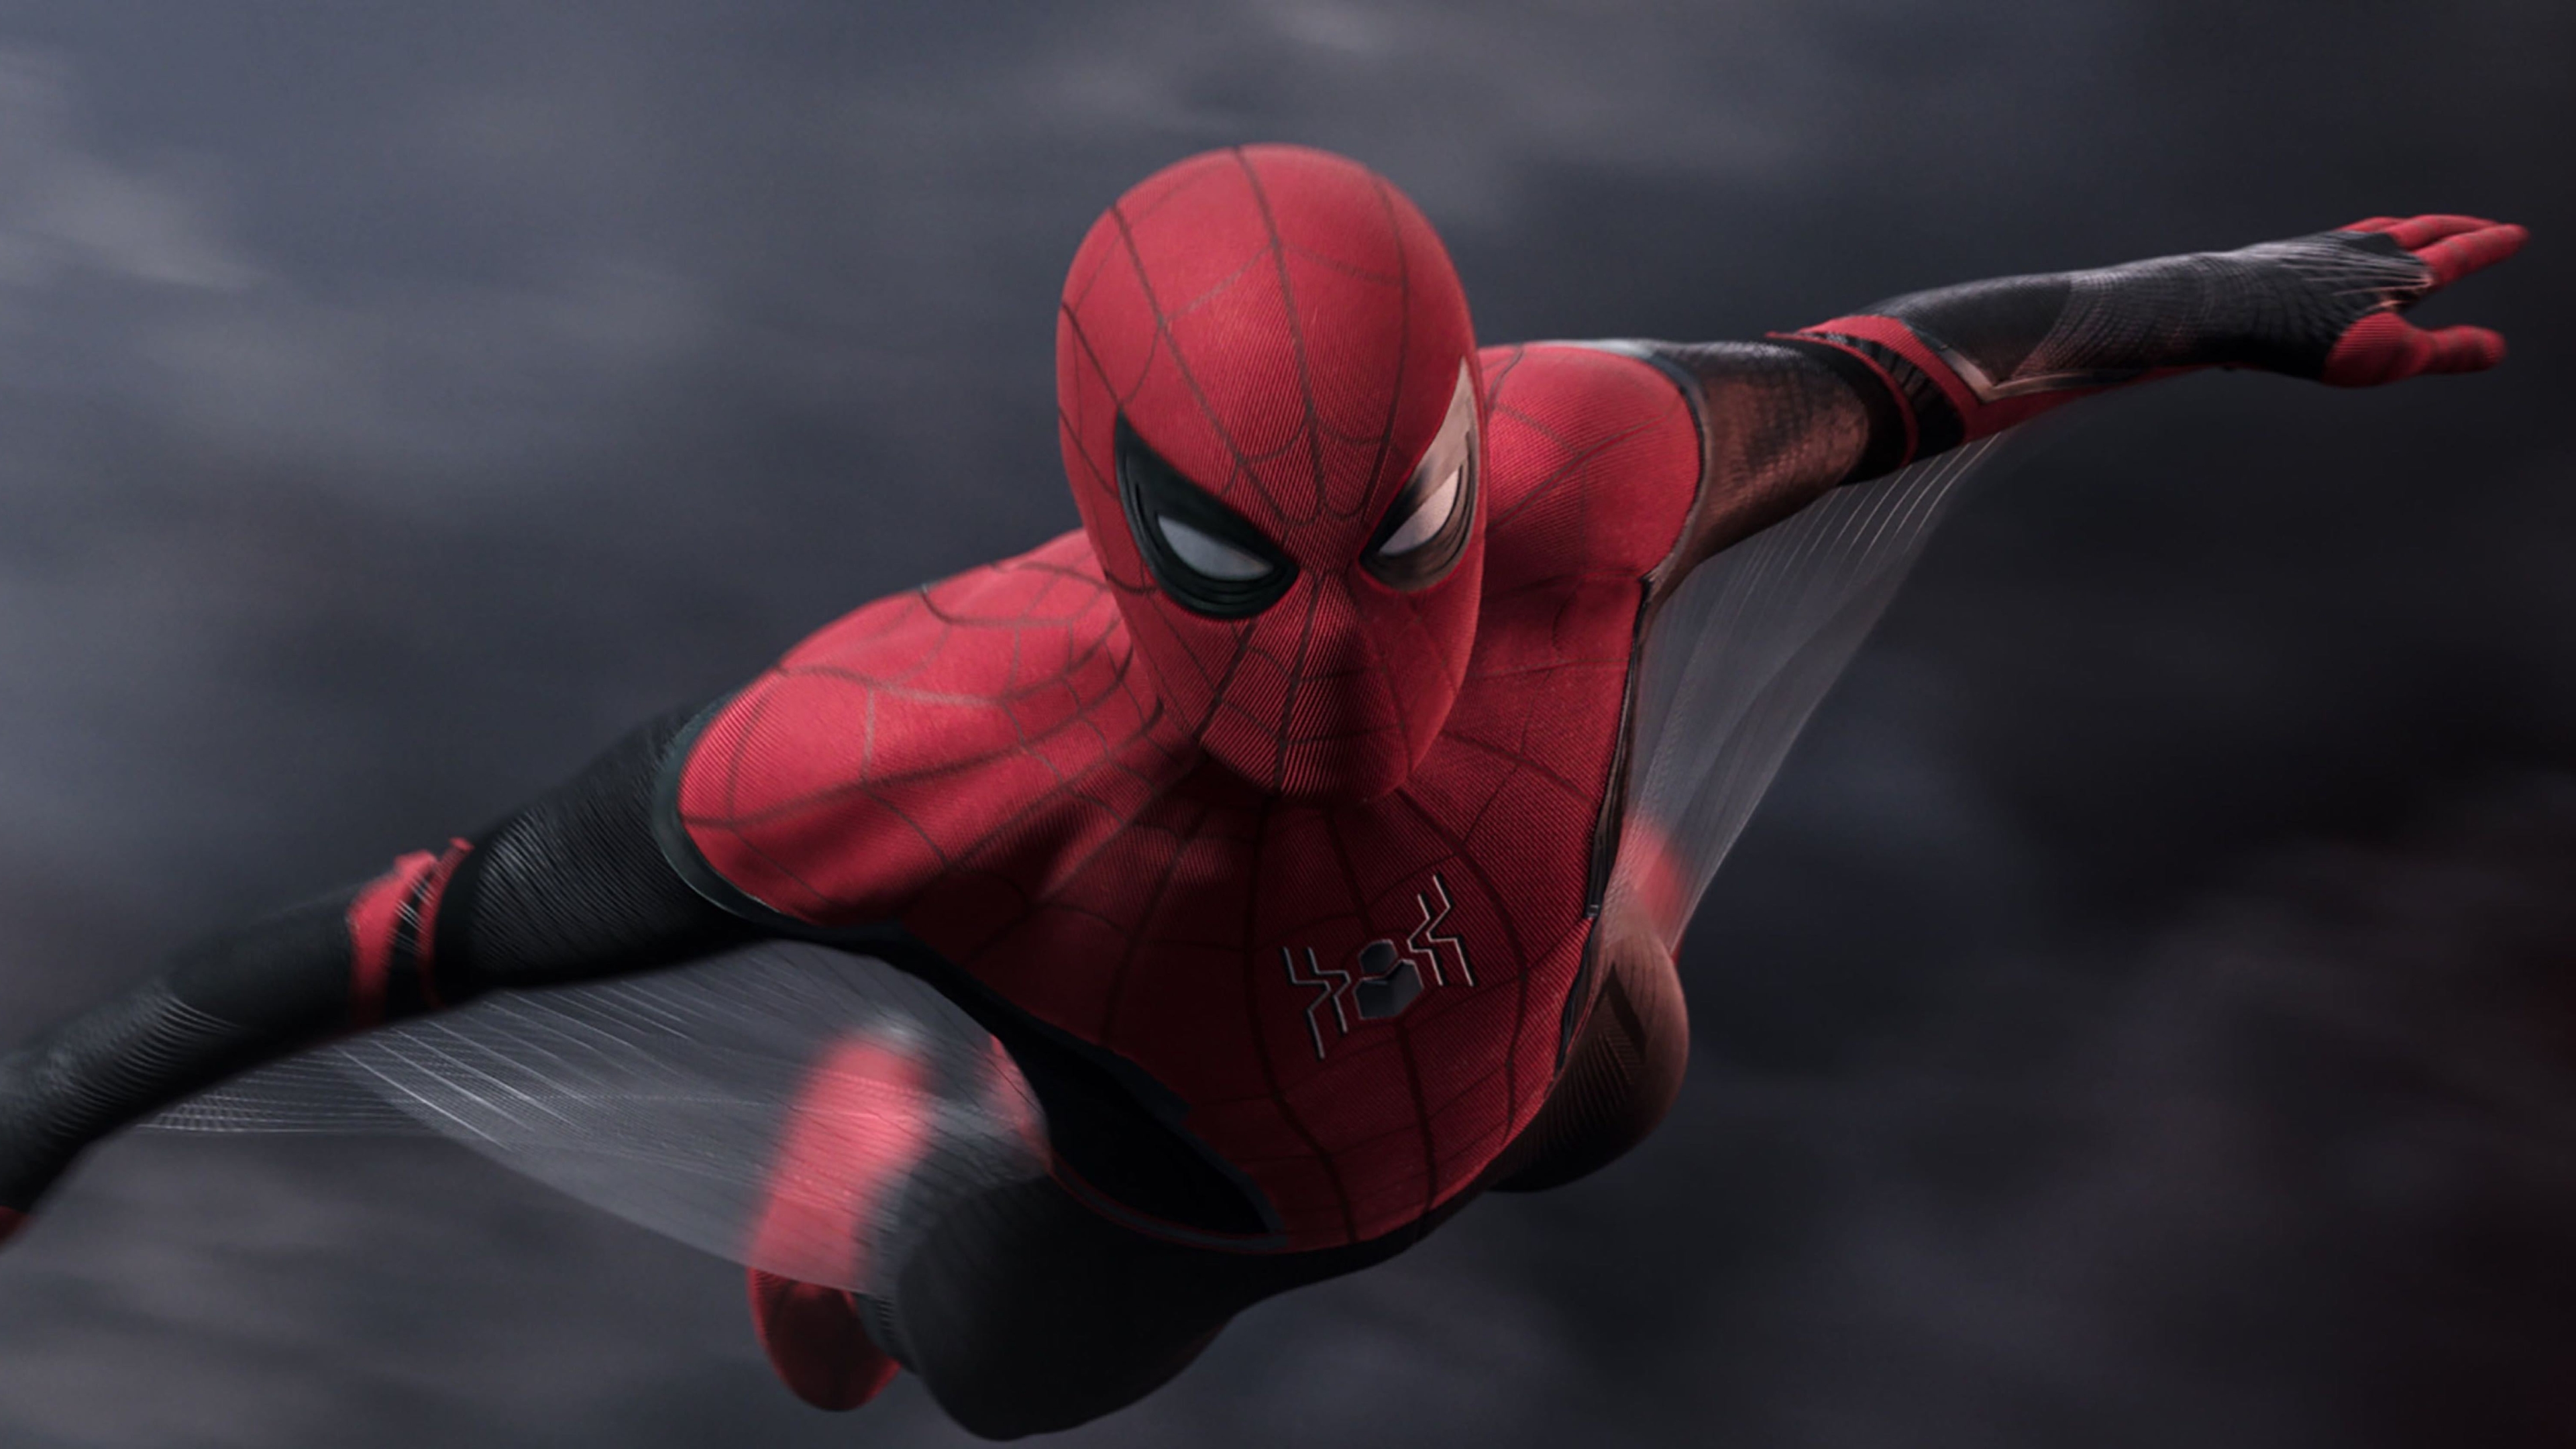 download spider man far from home 2019